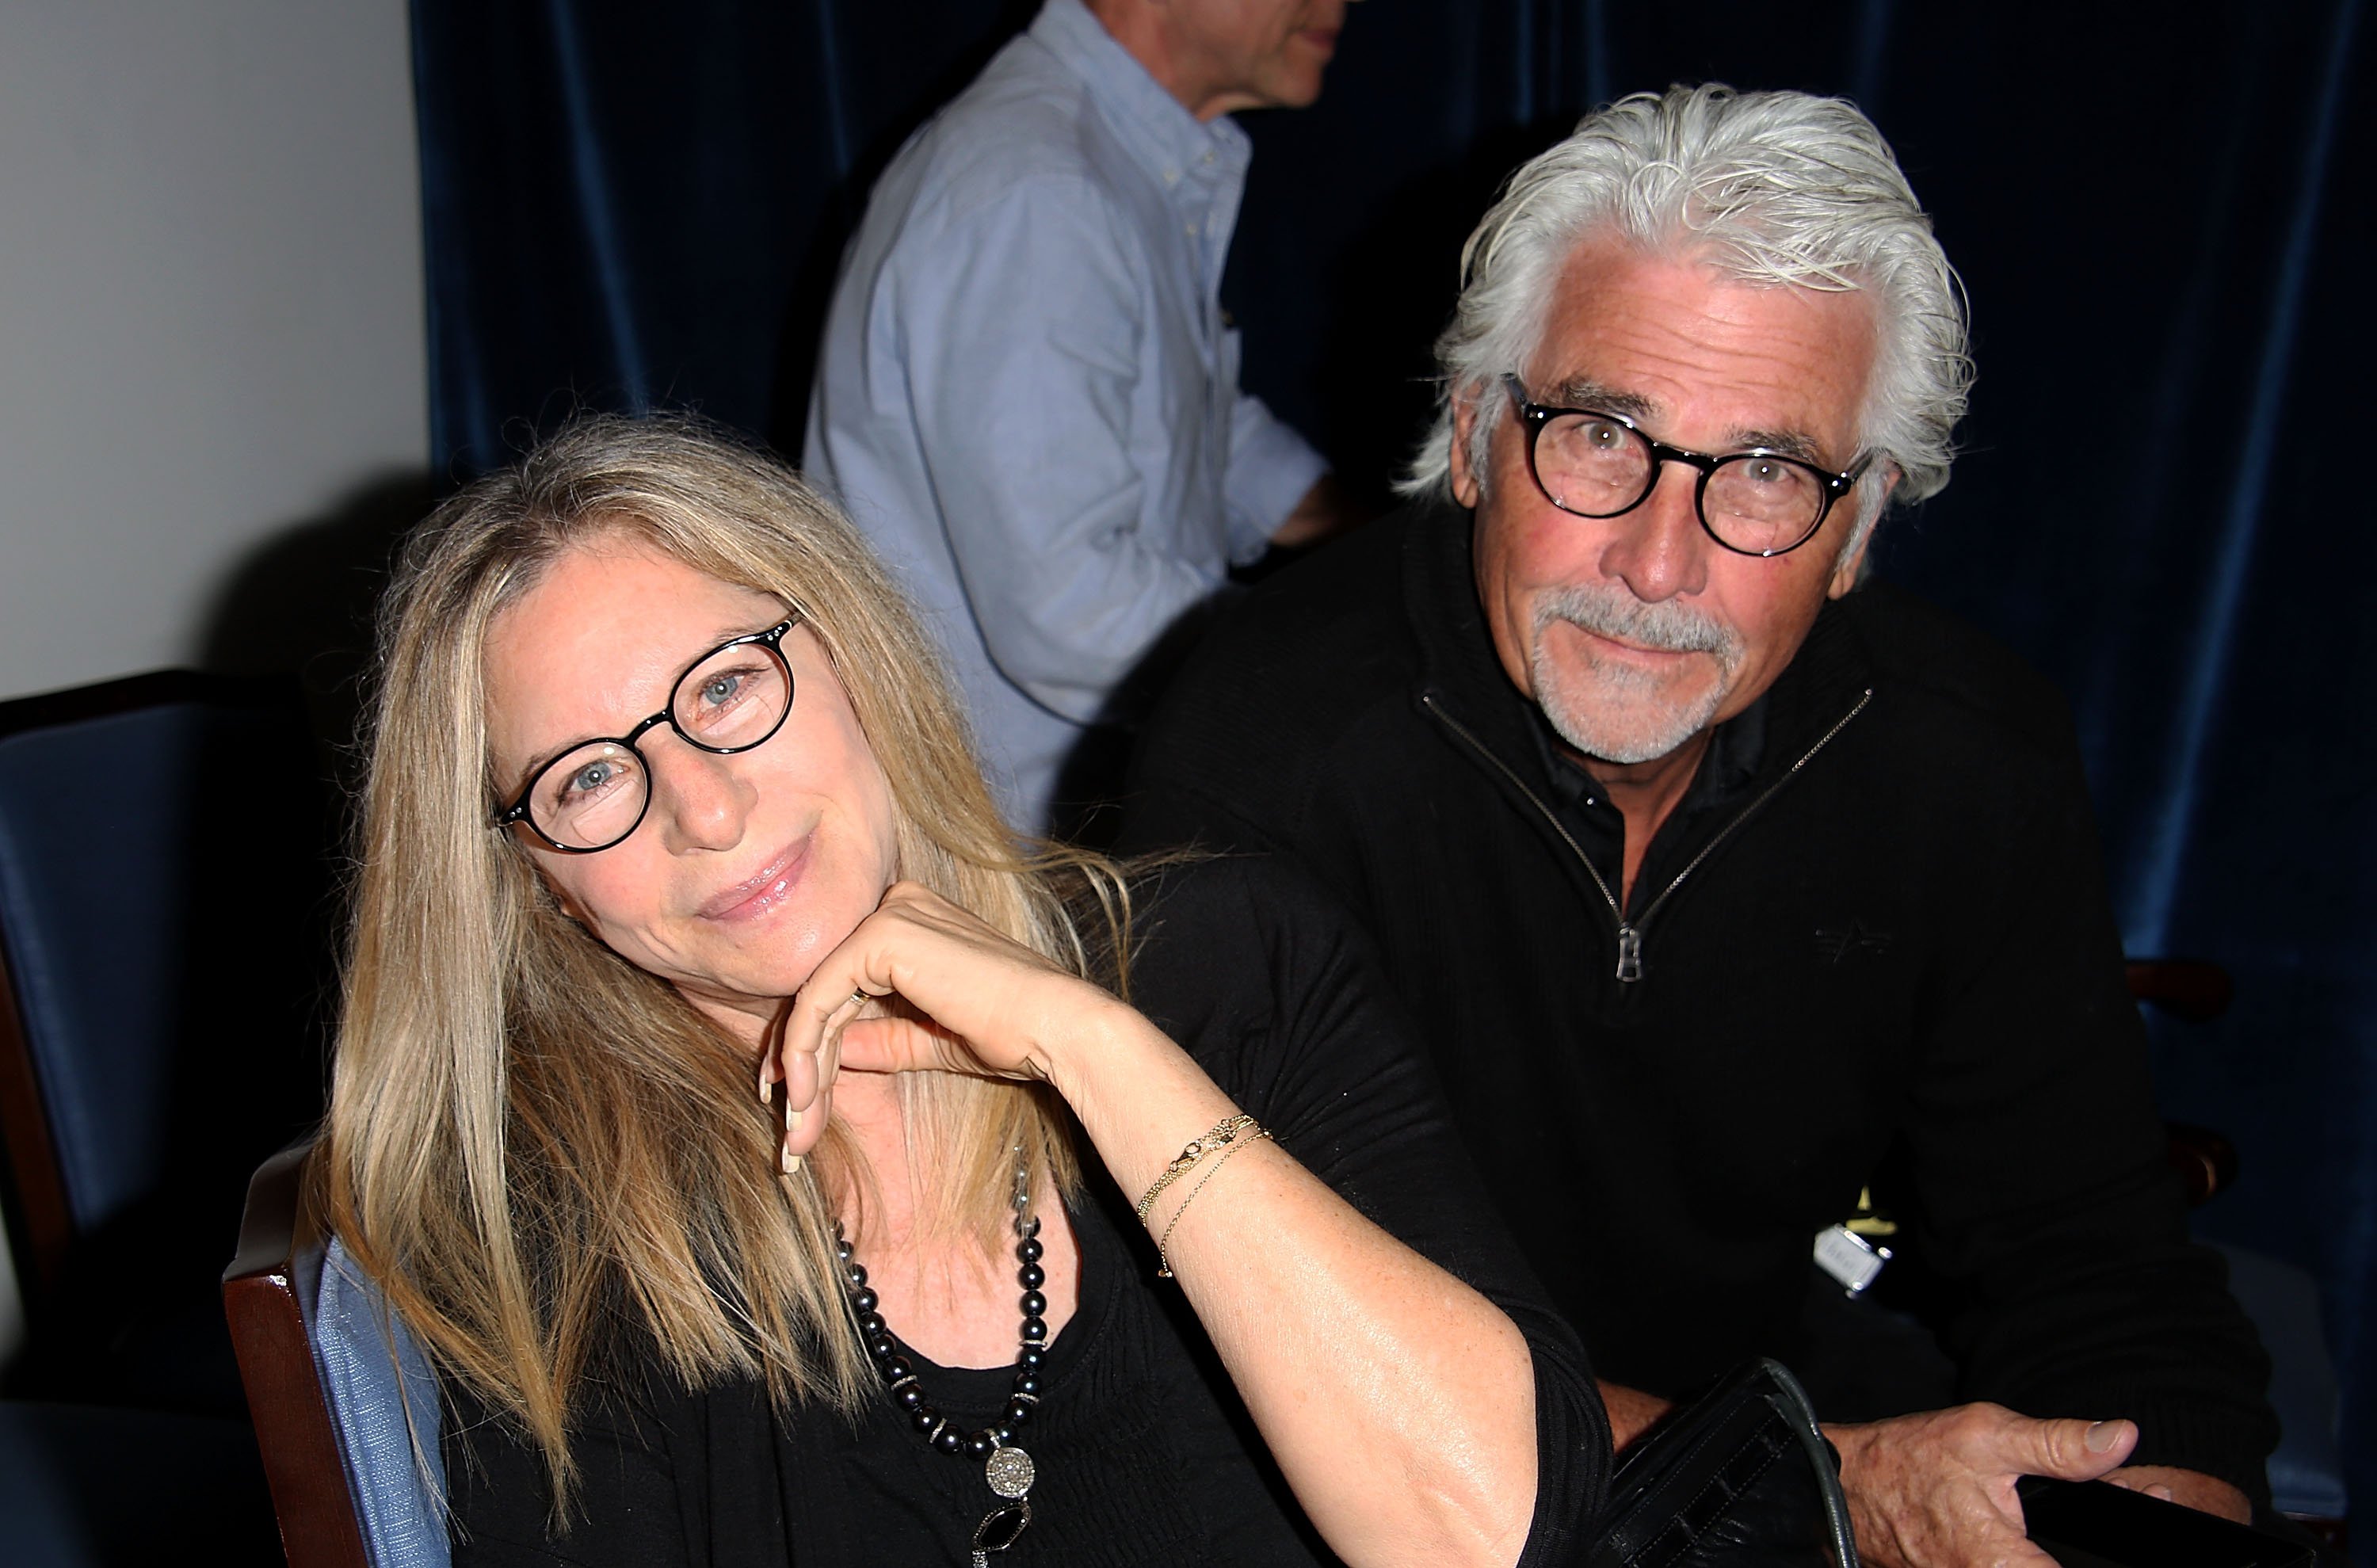 Barbra Streisand and James Brolin attend the "And So It Goes" premiere at Guild Hall on July 6, 2014 in East Hampton, New York. | Photo: Getty Images